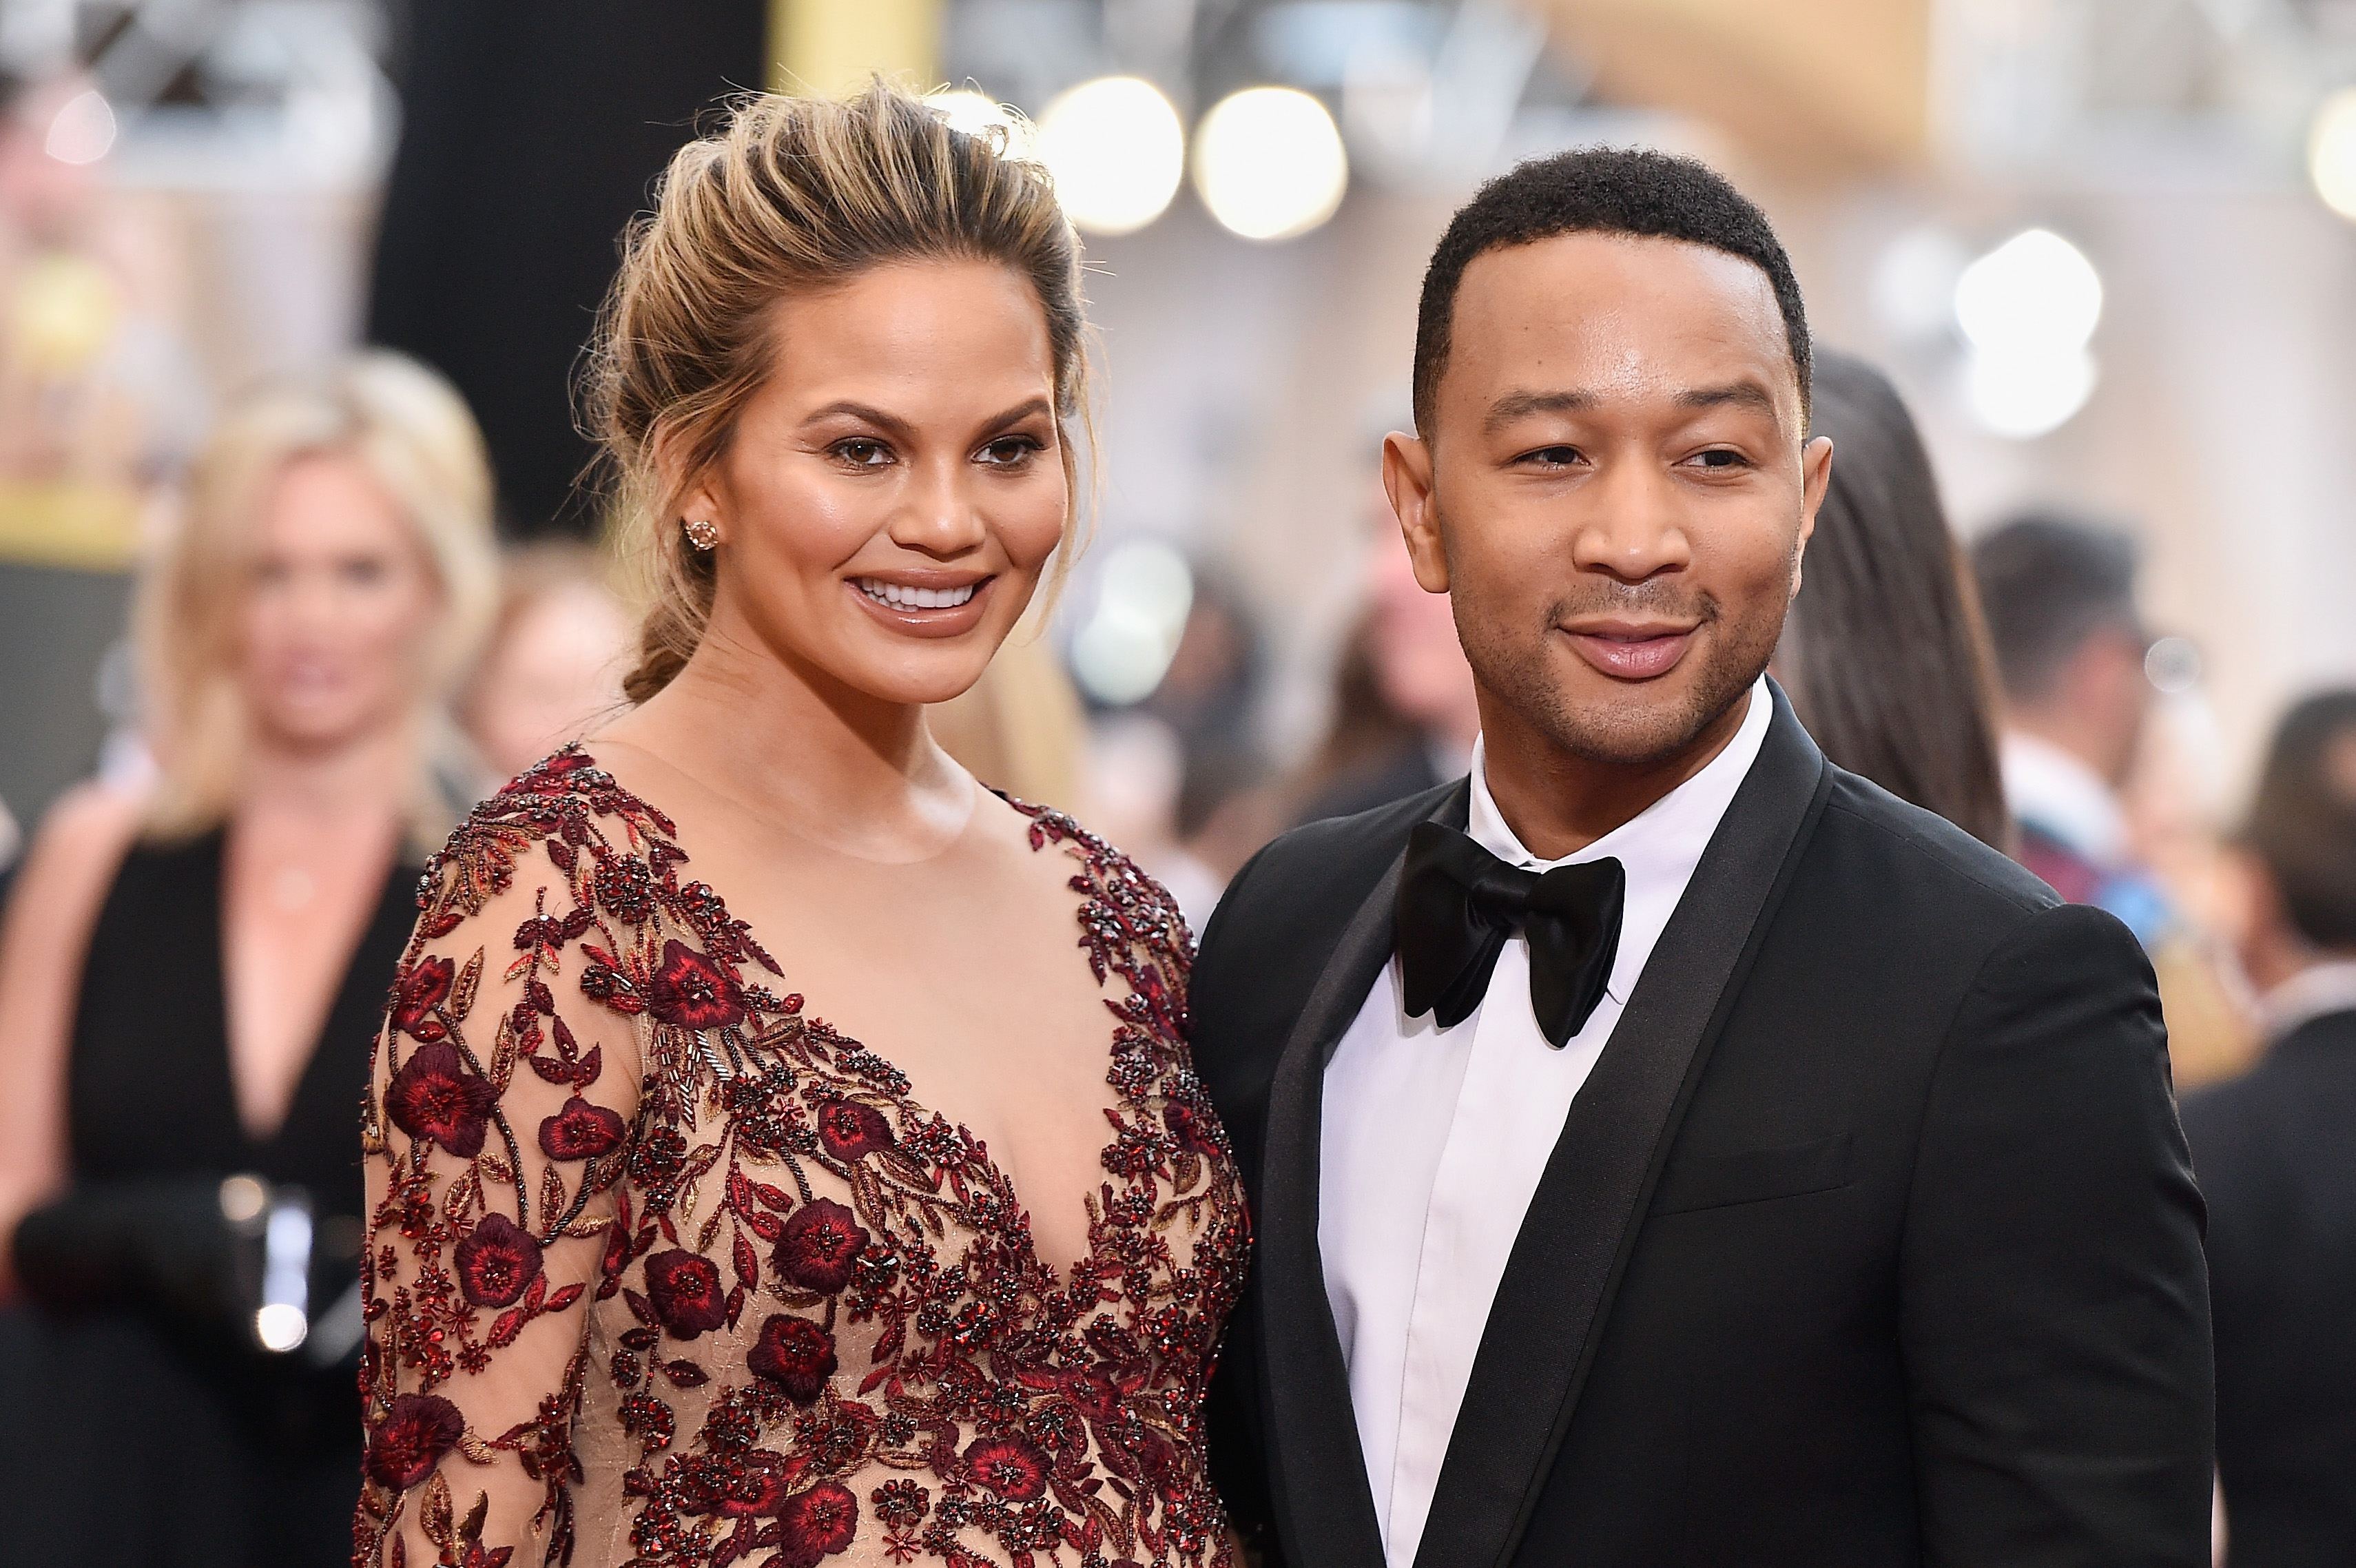 Model Chrissy Teigen (L) and recording artist John Legend attend the 88th Annual Academy Awards. (Photo by Kevork Djansezian/Getty Images)